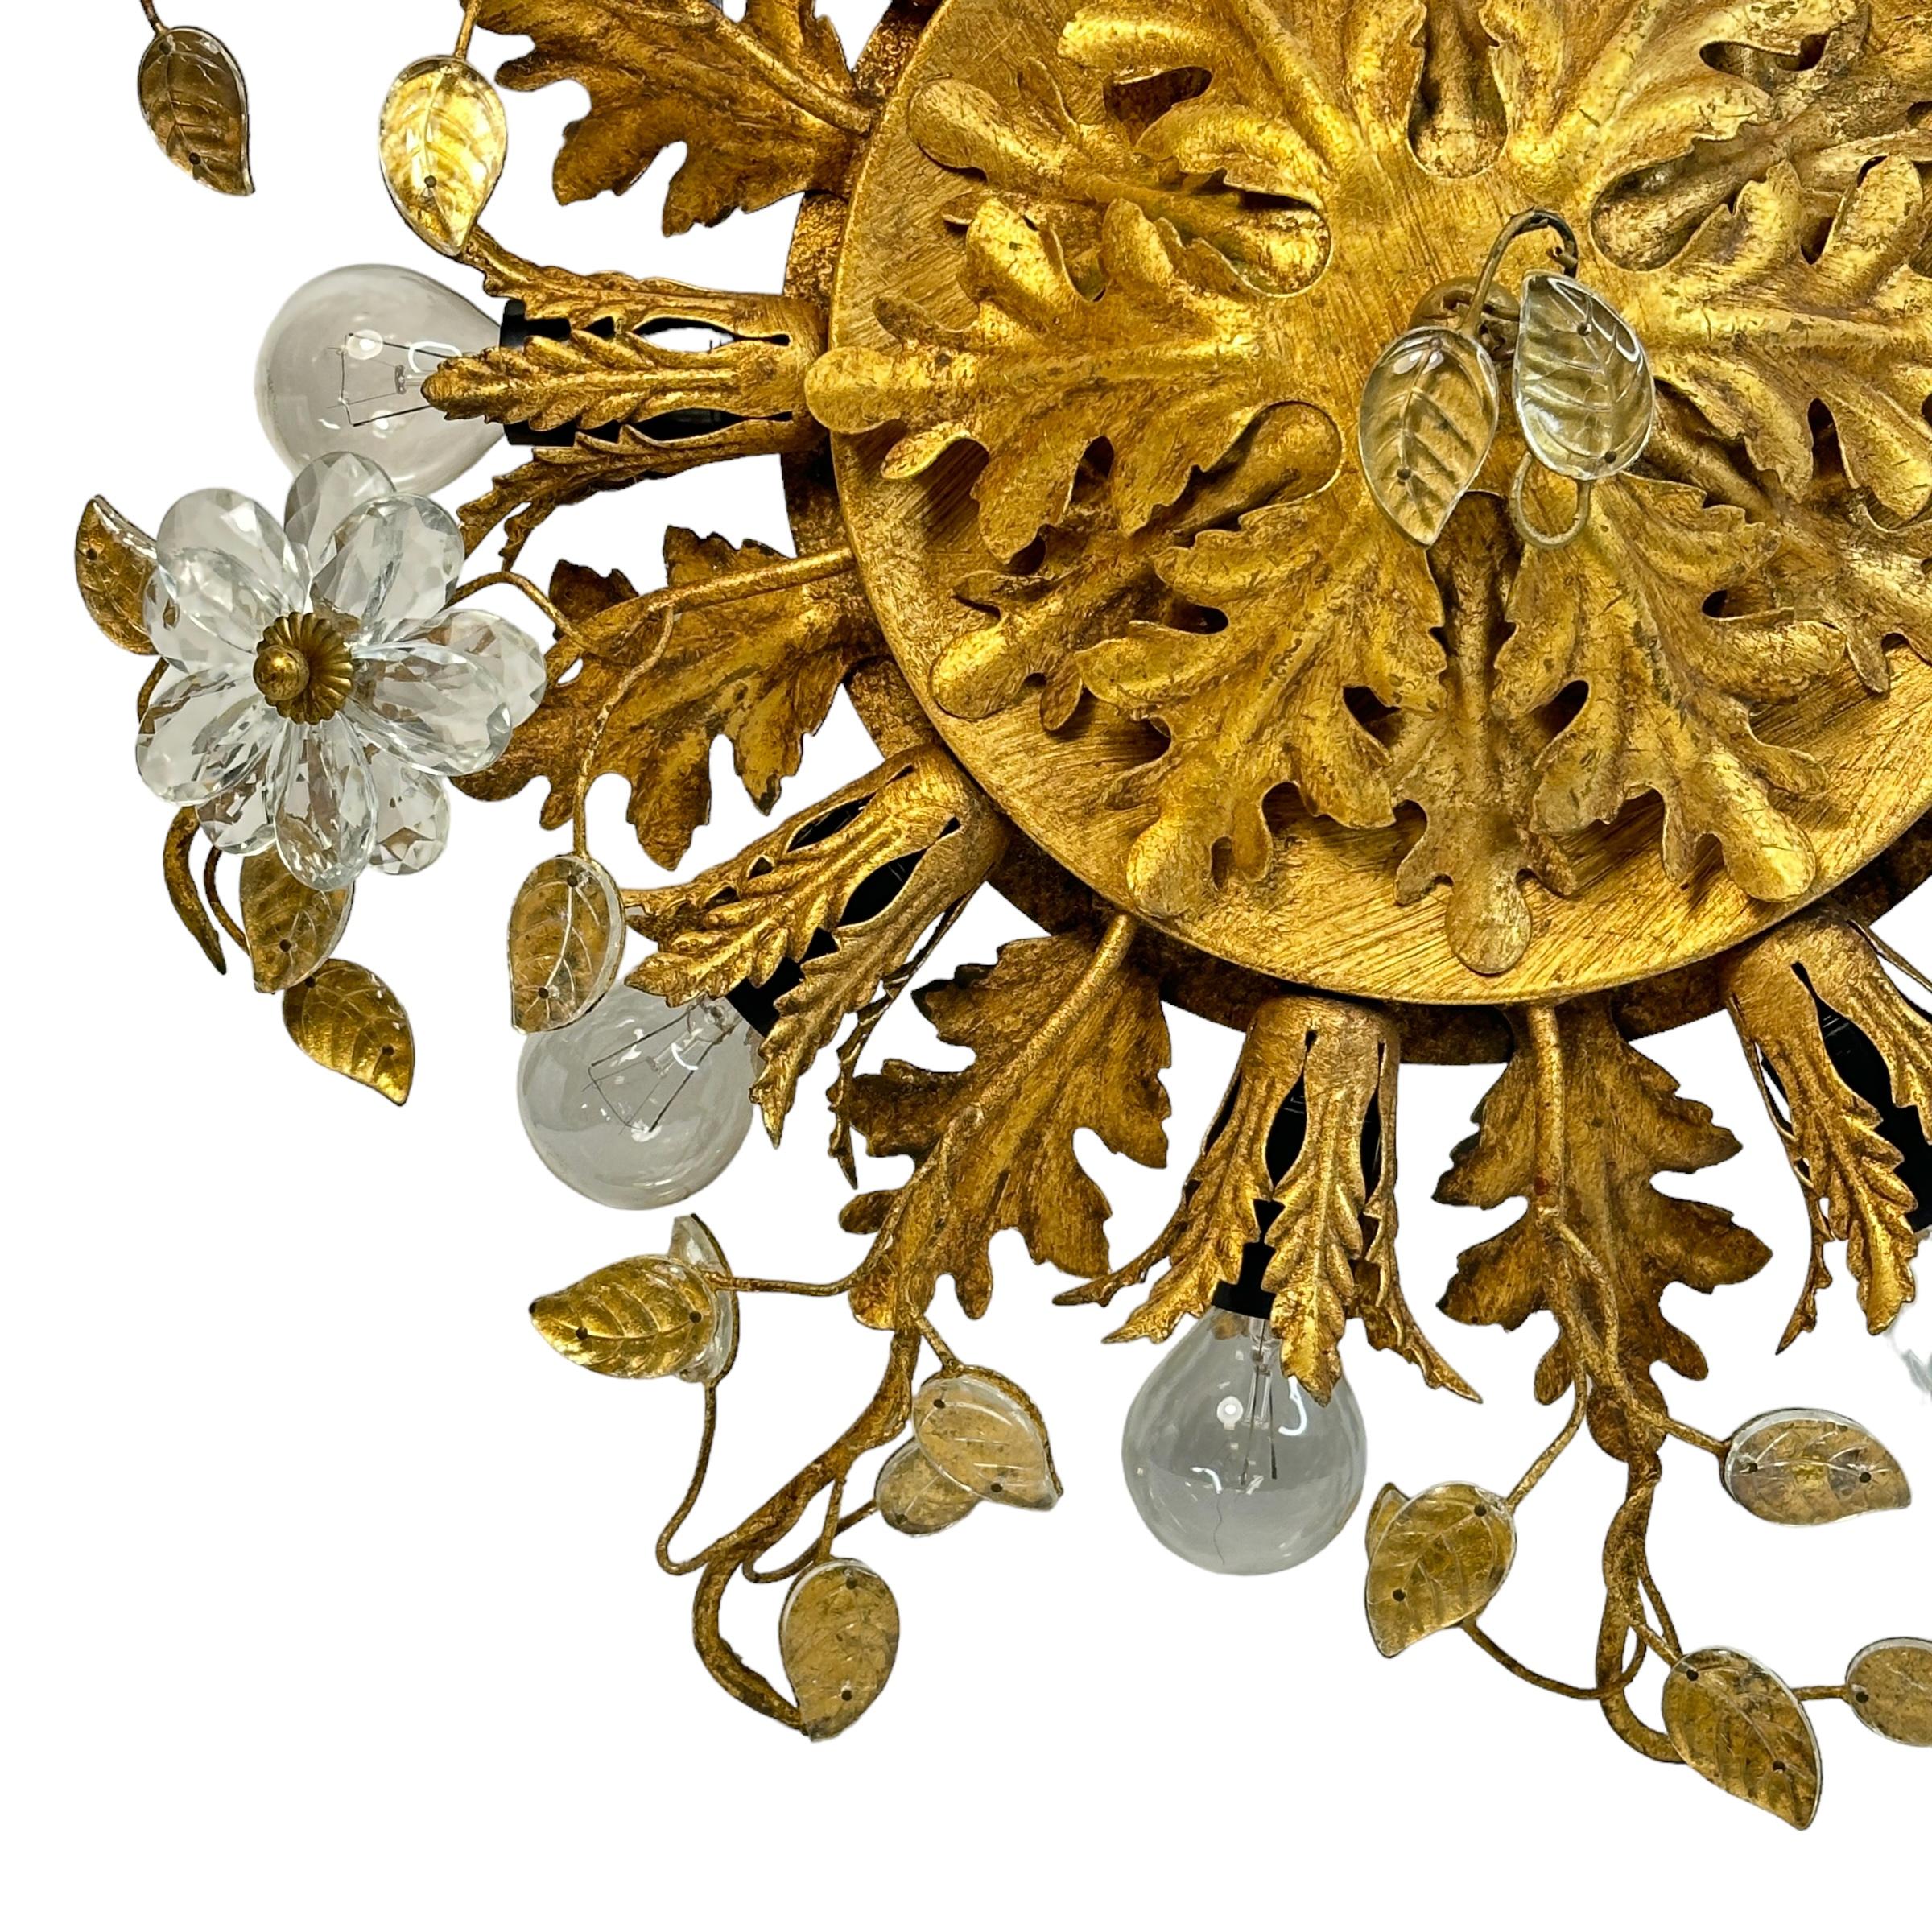 Add a touch of opulence to your home with this charming flush mount light. Perfect stunning gilt acanthus leaf design with clear Murano glass flowers and Murano glass leaves on fine gilt stems, to enhance any chic or eclectic home. We'd love to see